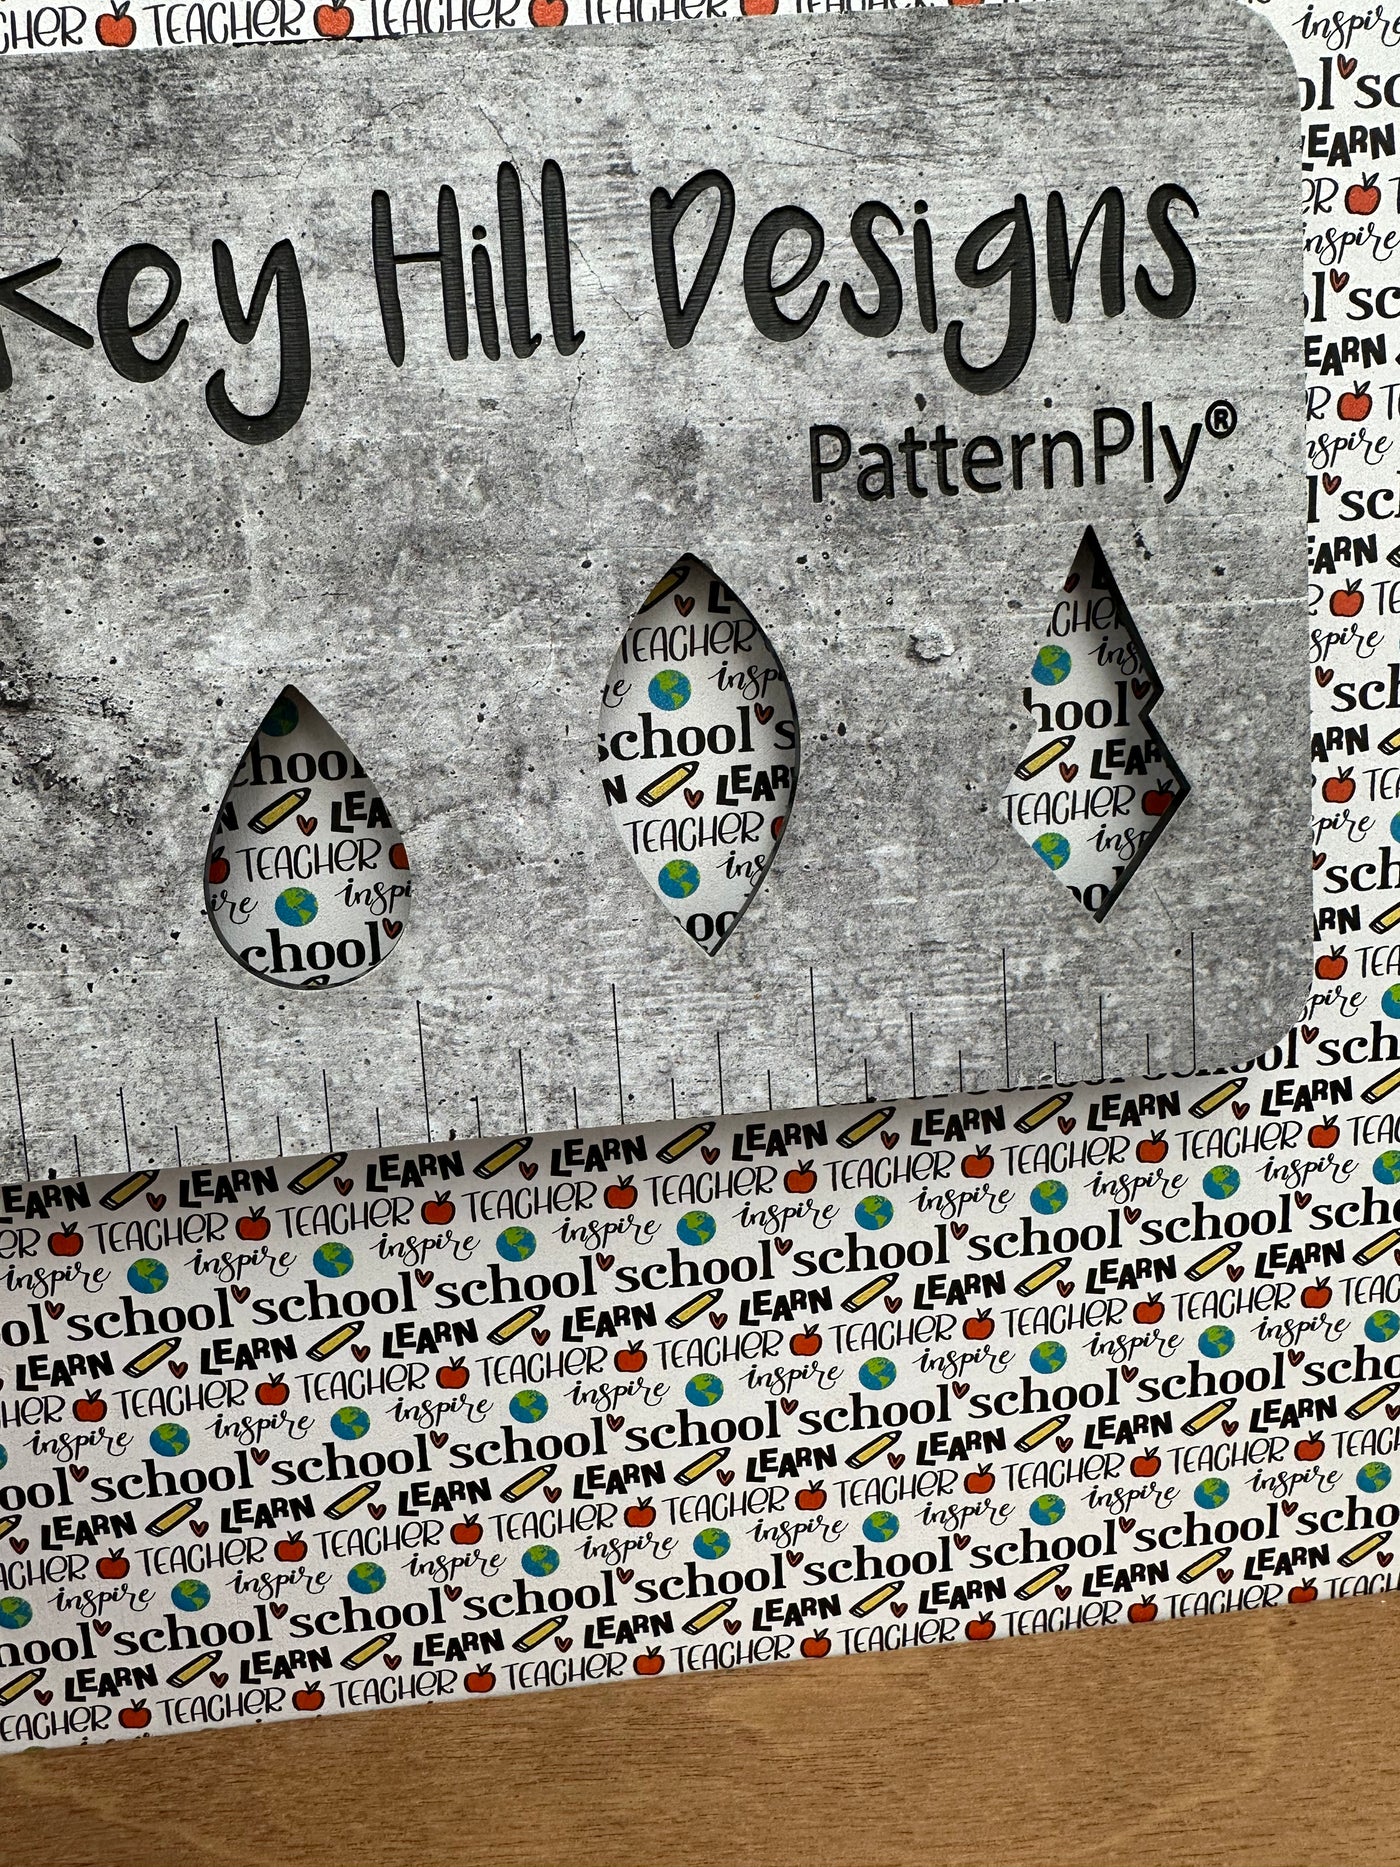 PatternPly® Teaching Words